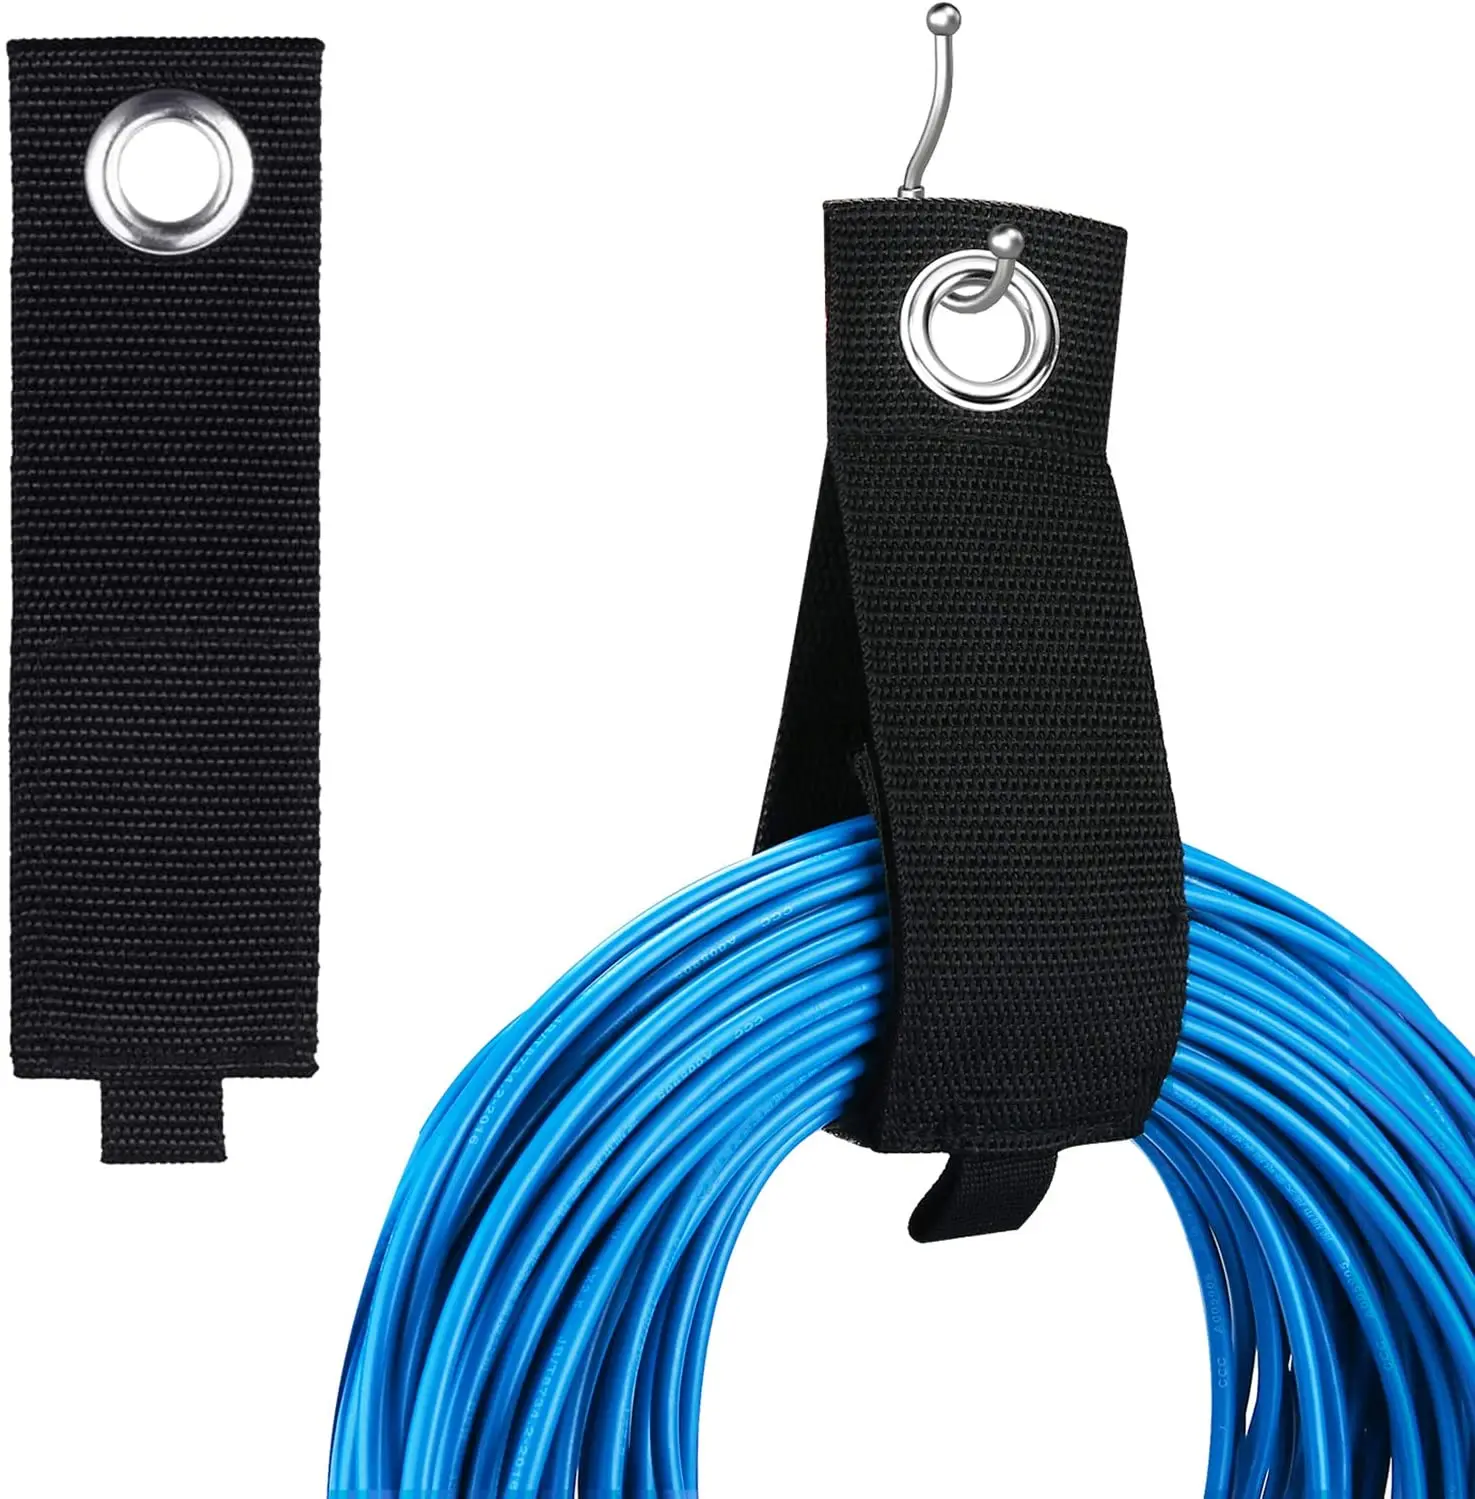 

Heavy Duty Storage Straps Extension Cord Holder Organizer Hook and Loop Adjustable Cable Tie Strap, Black,white in stock and different color is available